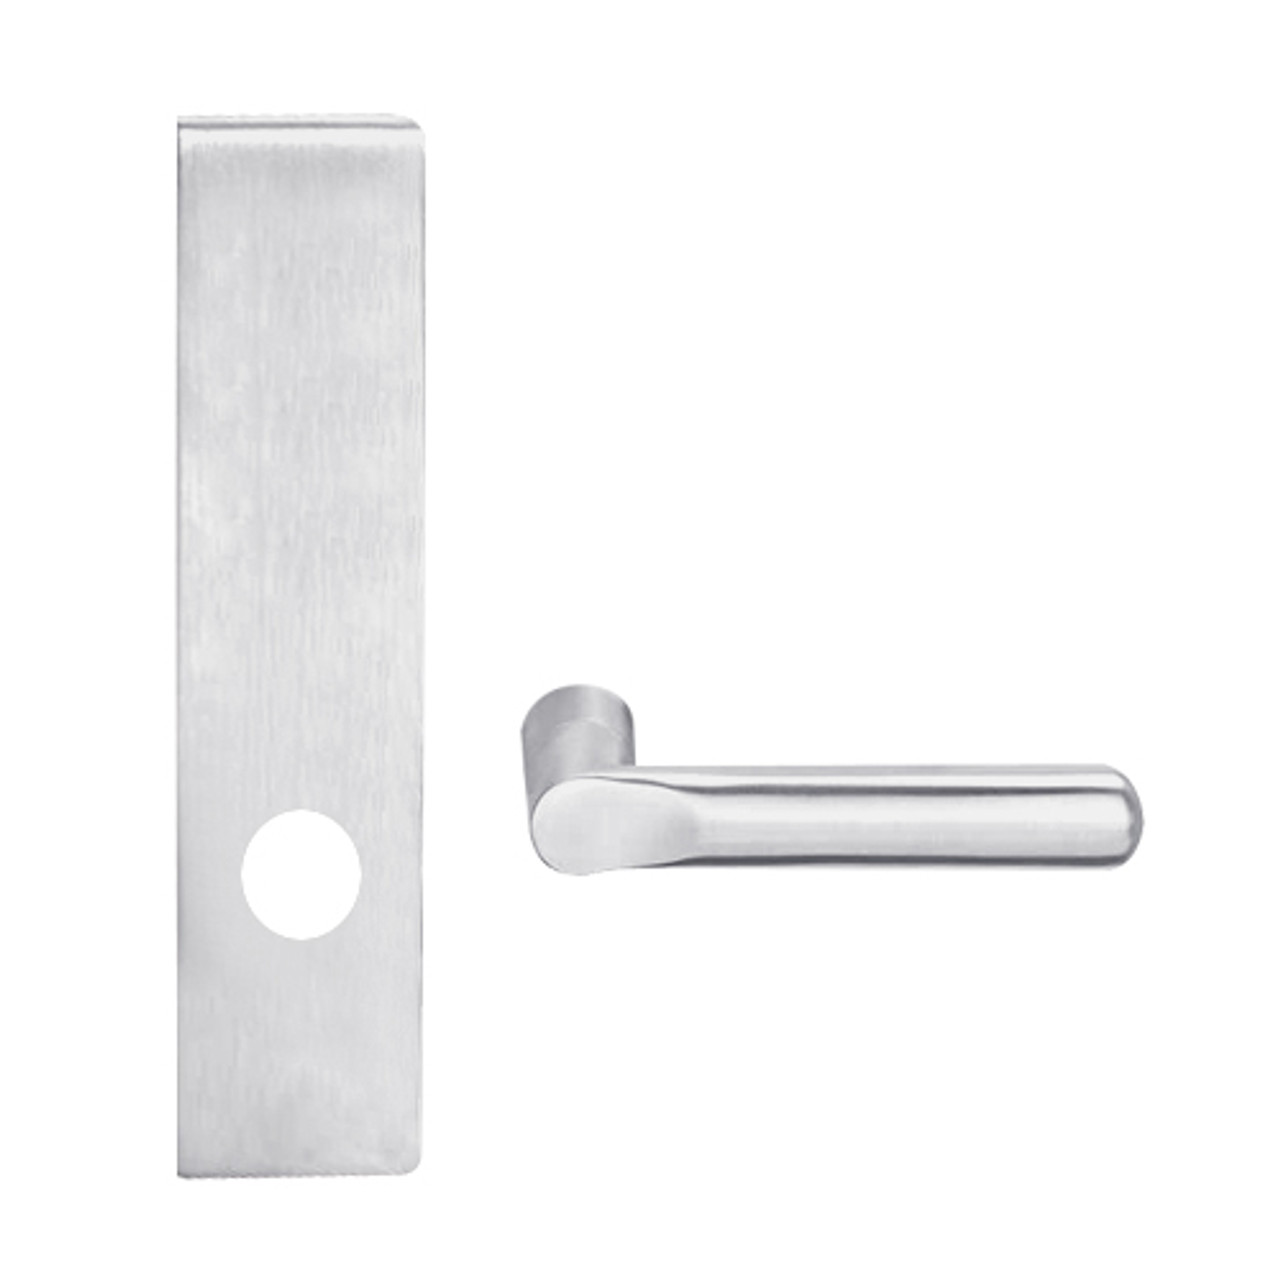 L9010-18L-625 Schlage L Series Passage Latch Commercial Mortise Lock with 18 Cast Lever Design in Bright Chrome